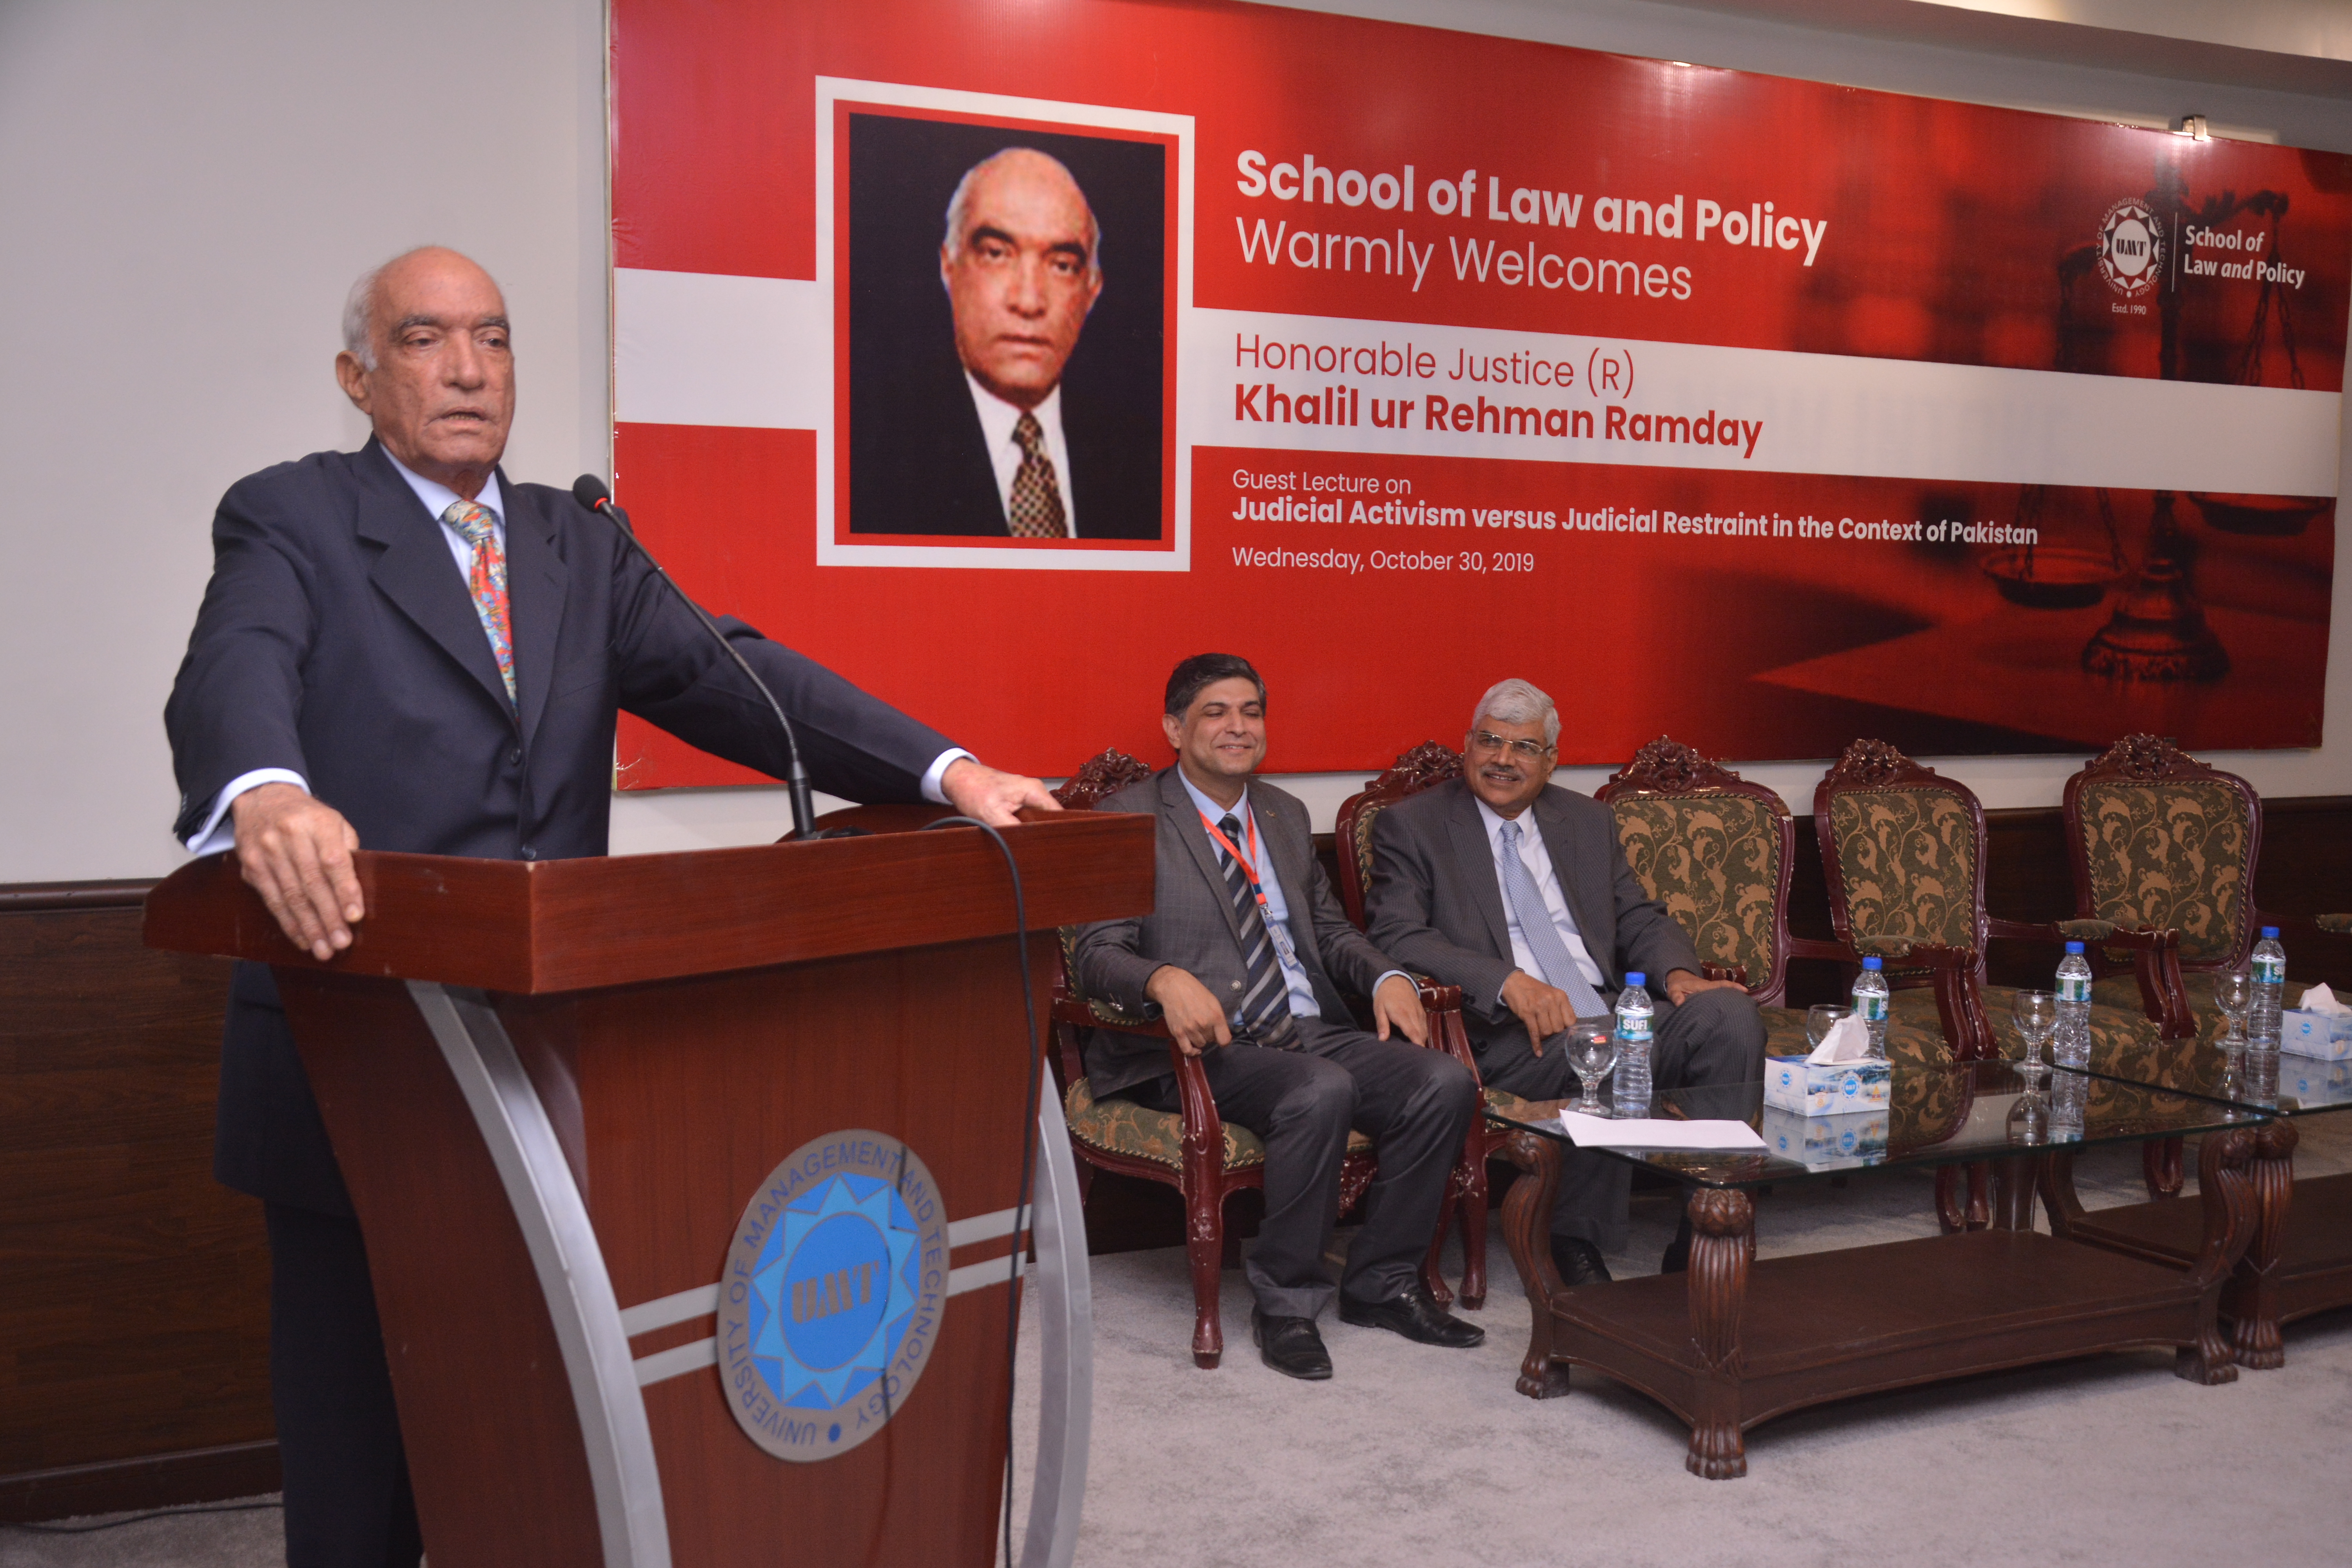 Guest lecture on Judicial Activism versus Judicial restraint by Justice(R) Khalil ur Rehman Ramday